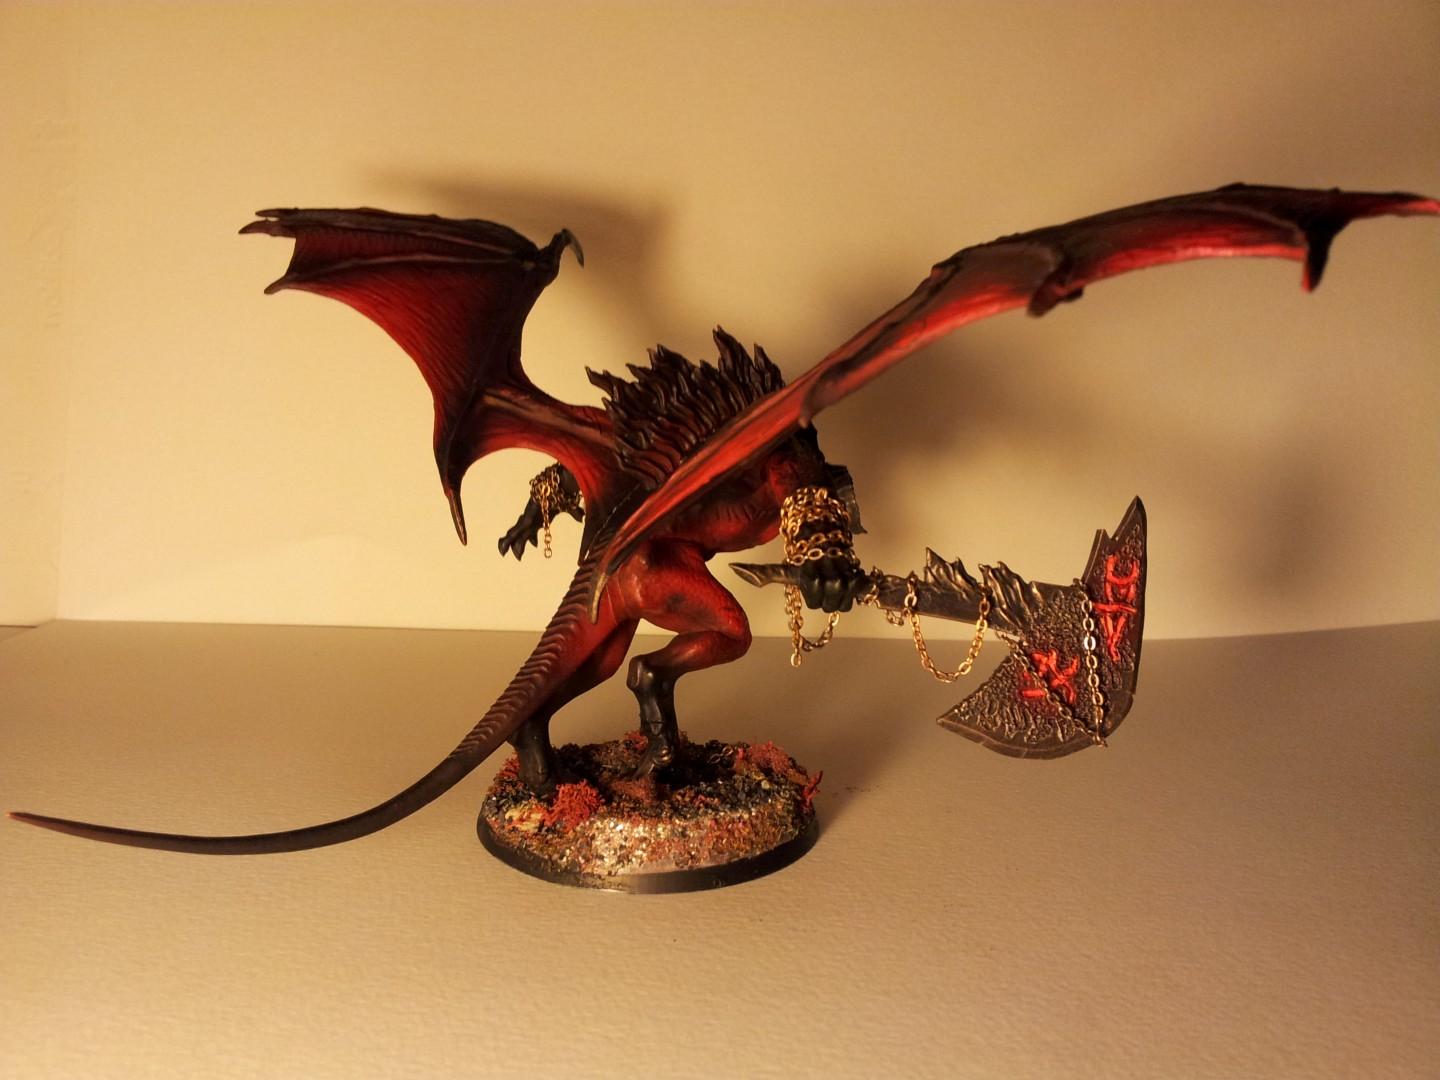 Balrog, Balrog. Bloodthirster, Bloodthirster, Chaos, Chaos Daemons, Conversion, Daemons, Fire, Greater Daemon, Khorne, Object Source Lighting, Red